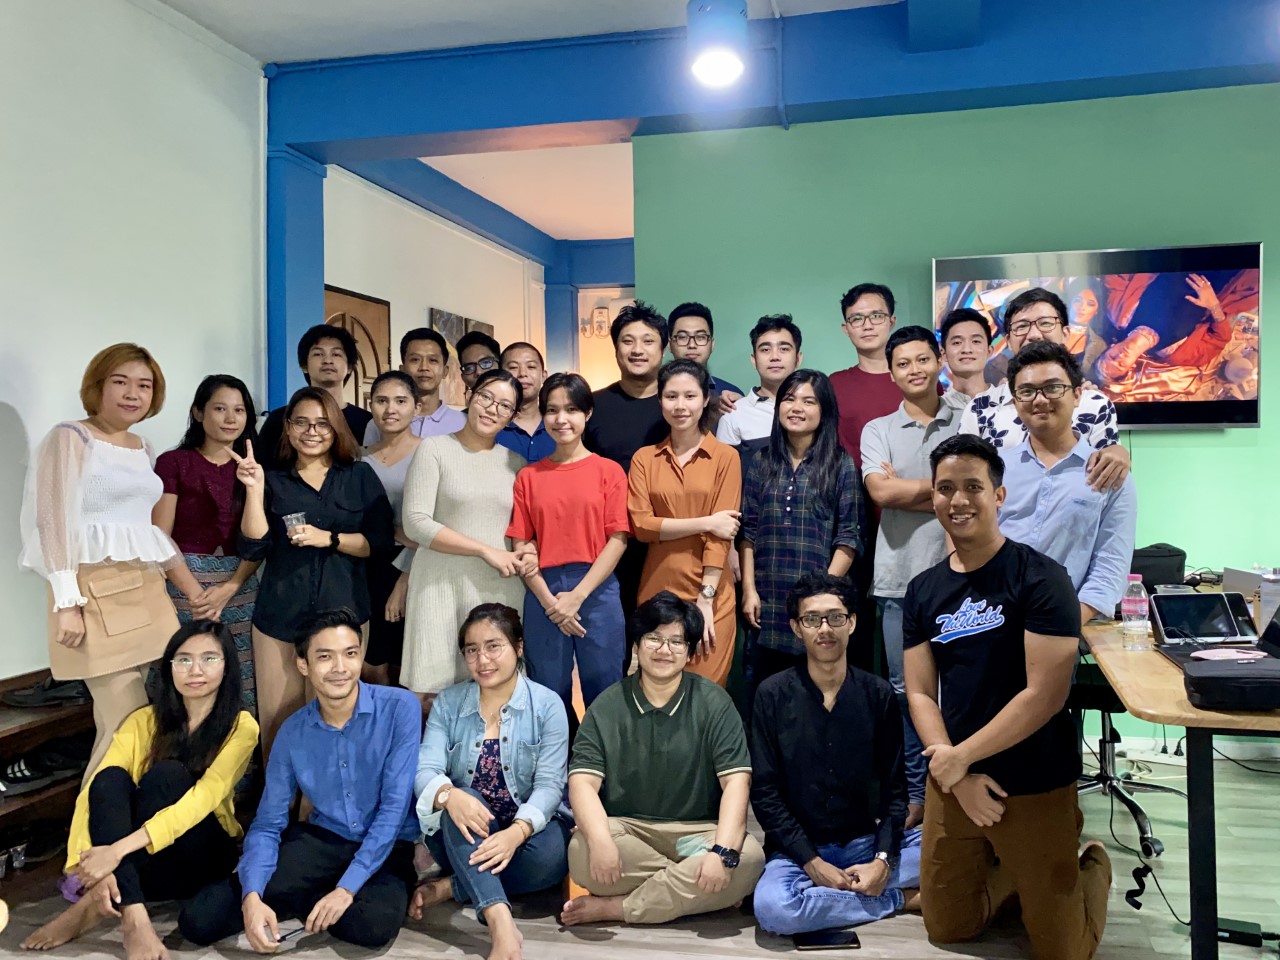 Myanmar HR tech startup Better HR plans expansion in Thailand, Cambodia, and Laos